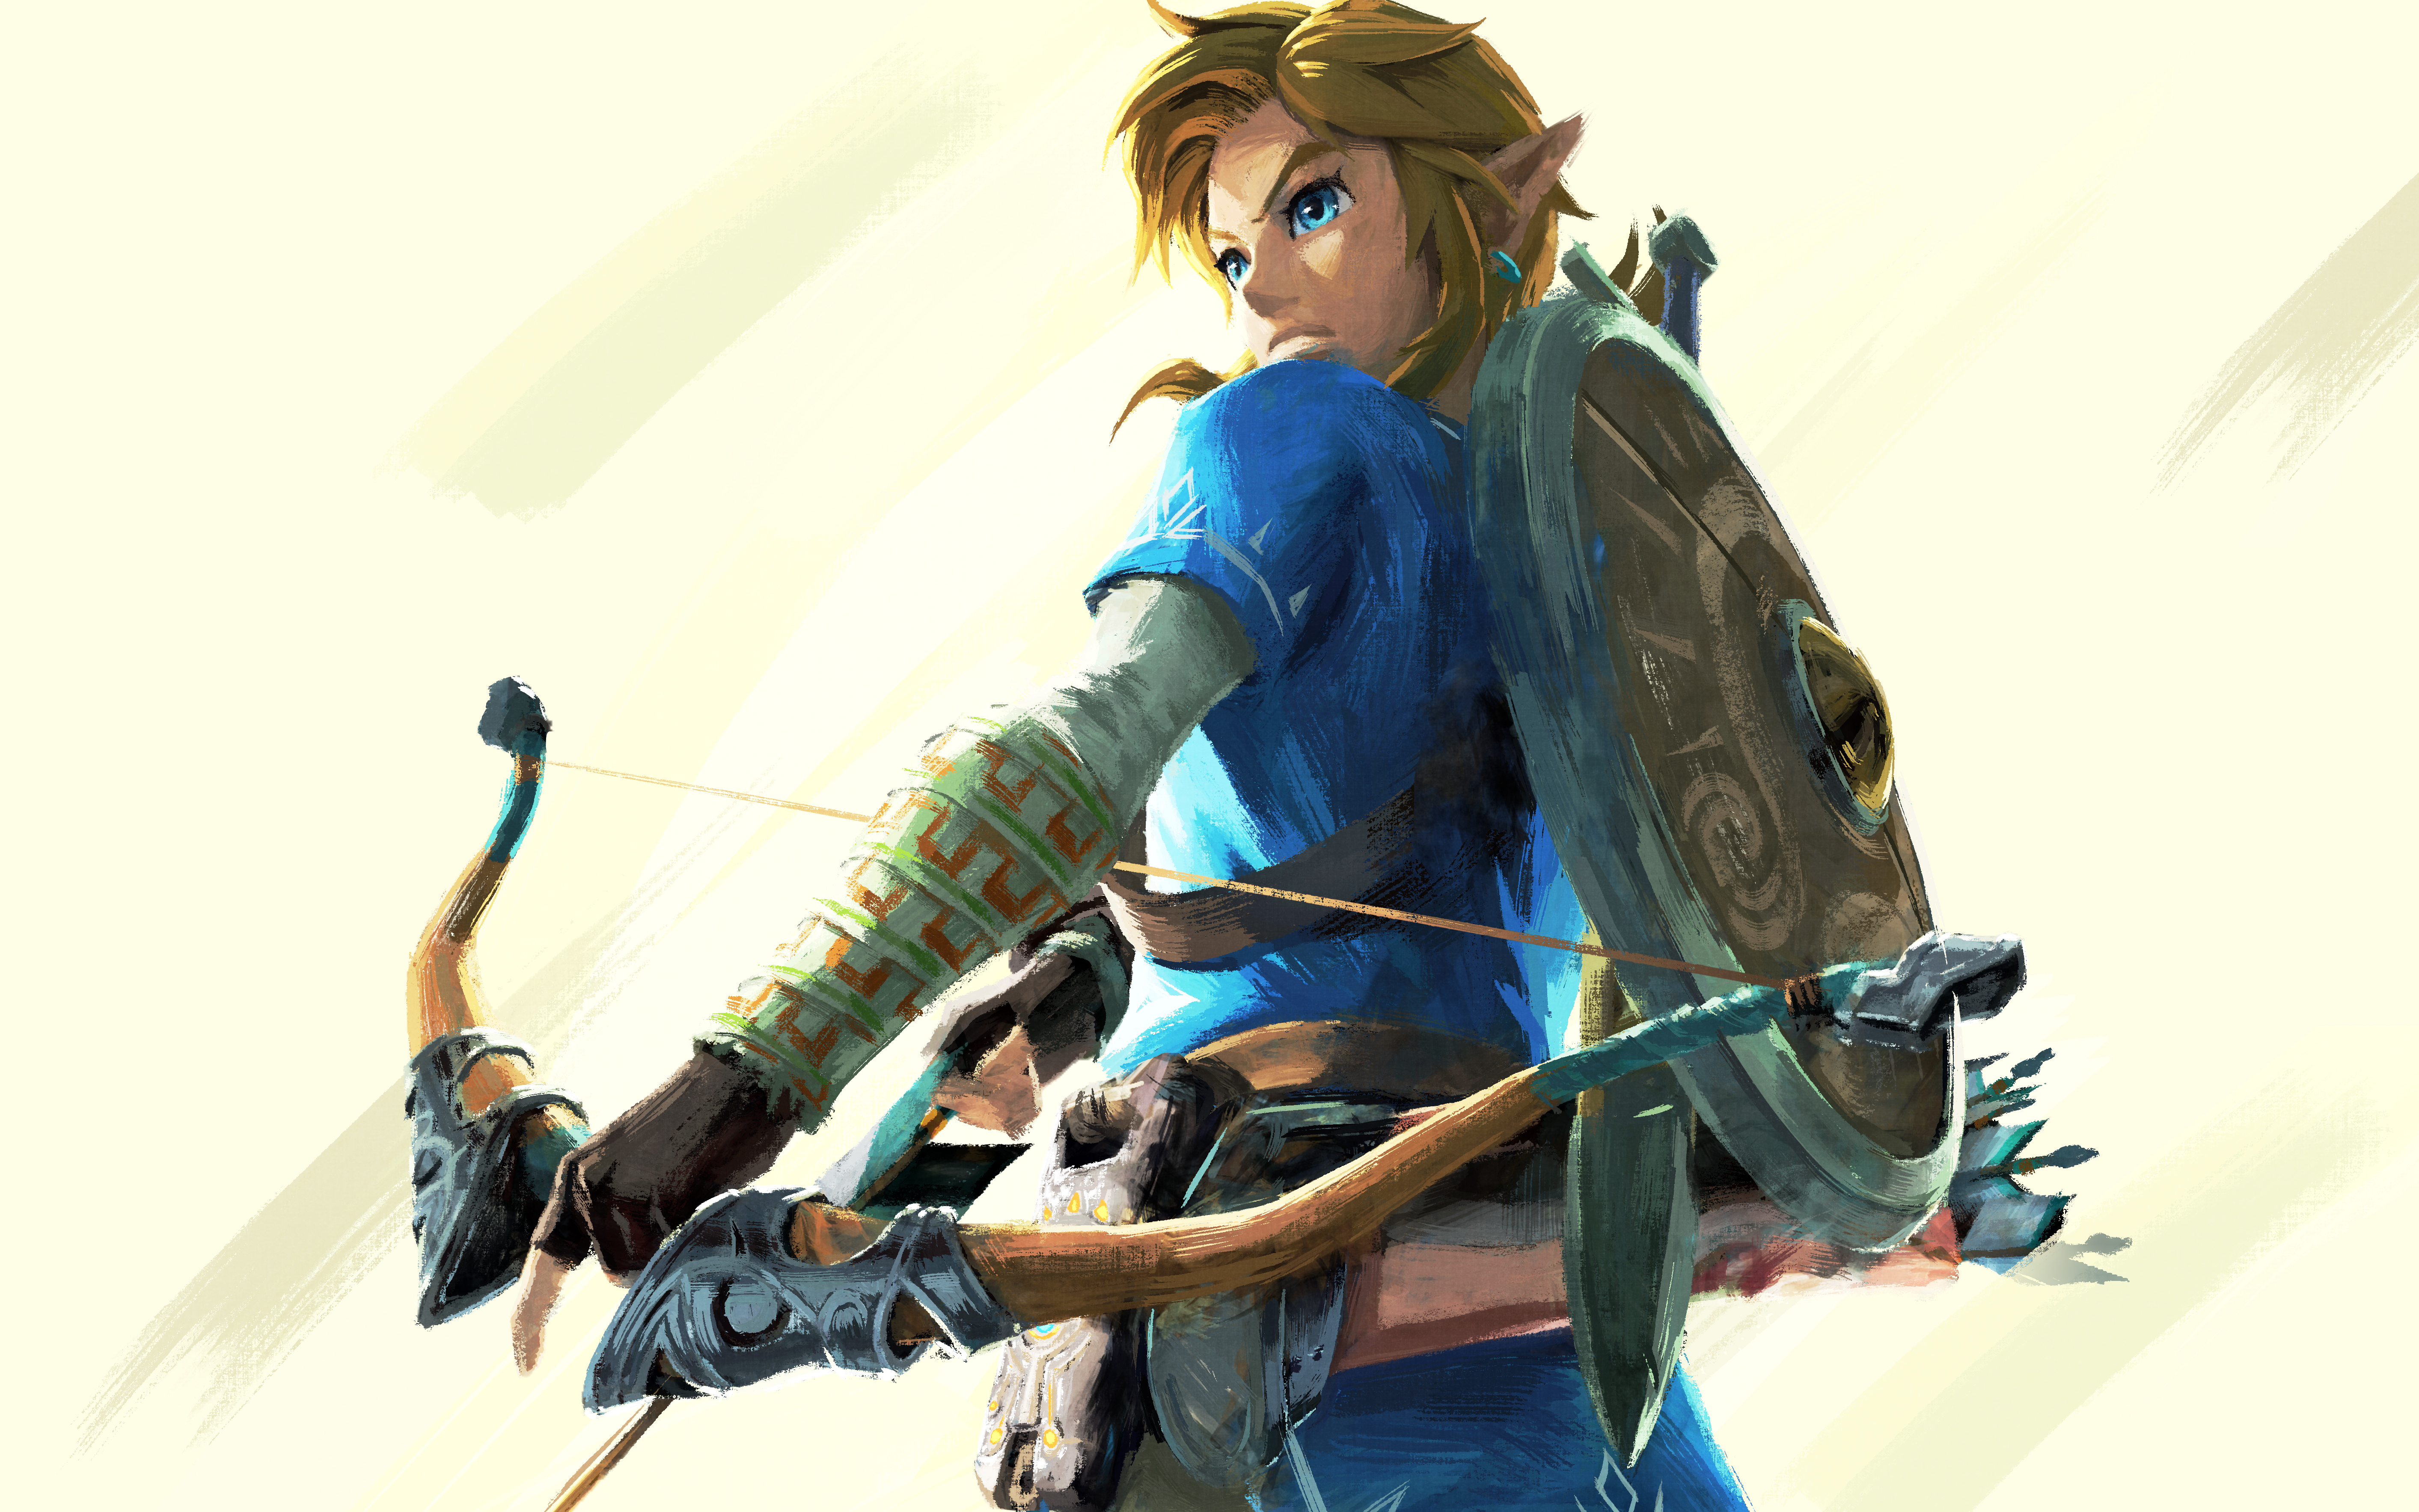 Video Game The Legend of Zelda: Breath of the Wild HD Wallpaper | Background Image